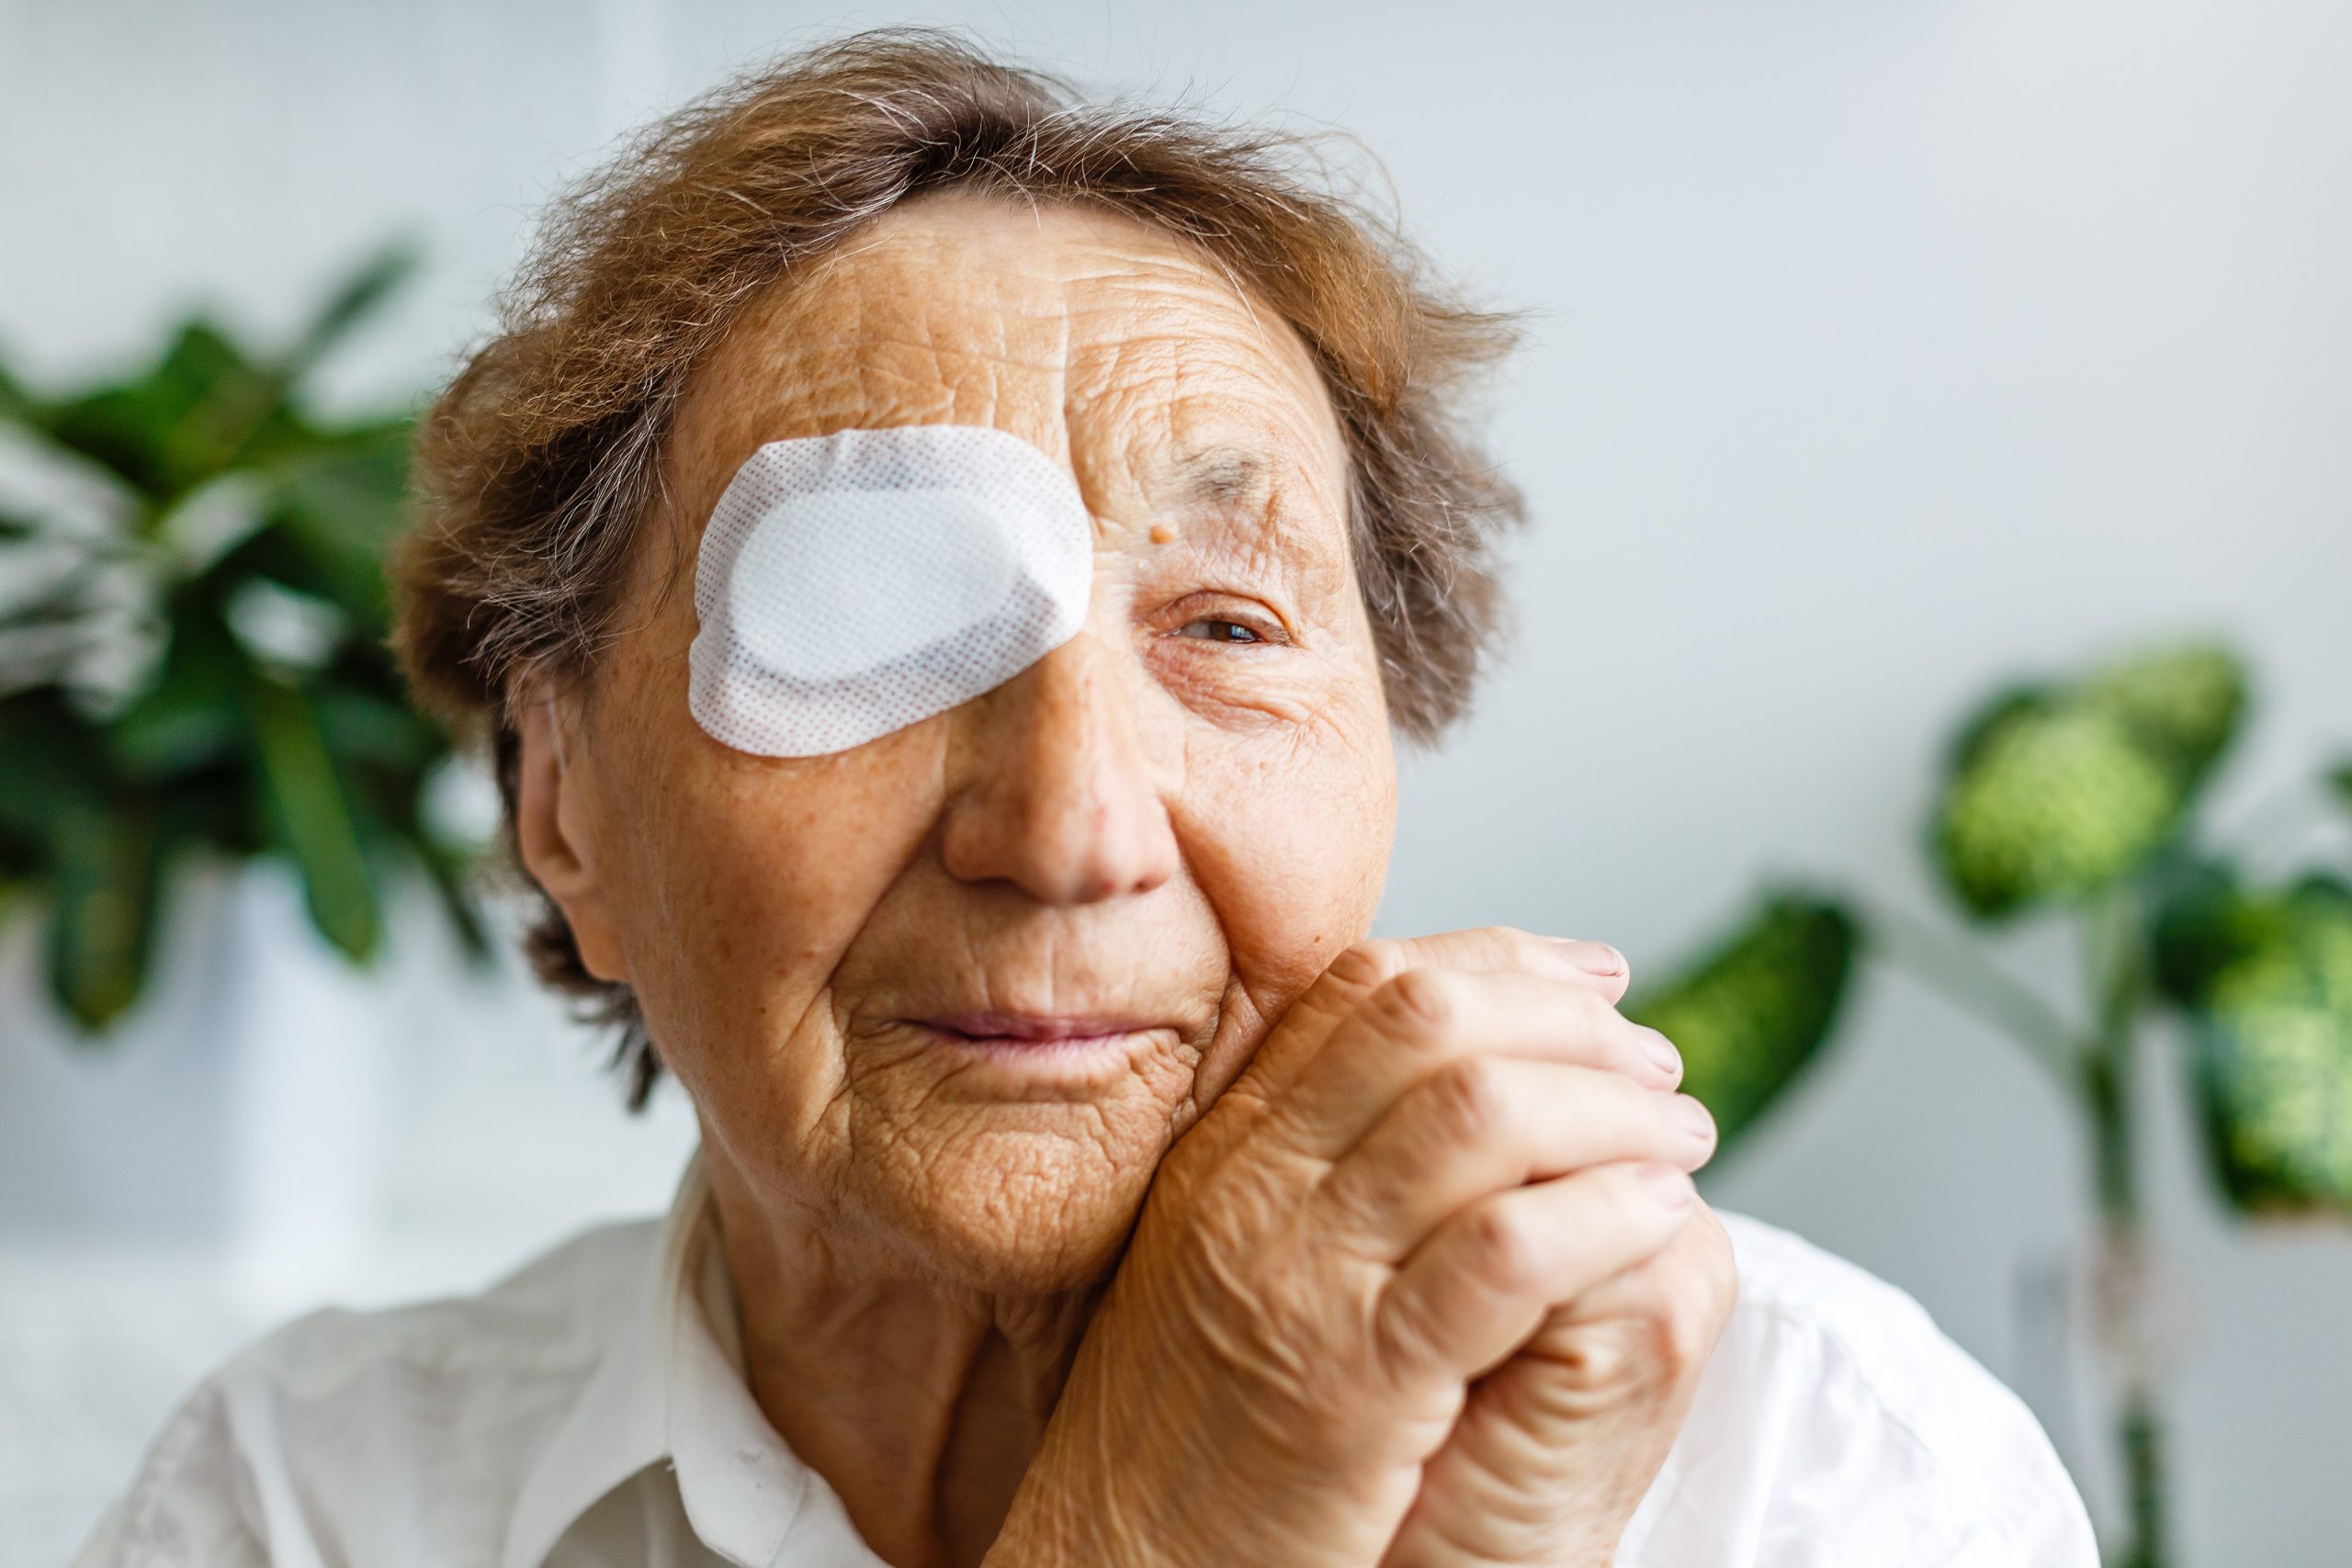 Elderly use eye shield covering after cataract surgery.